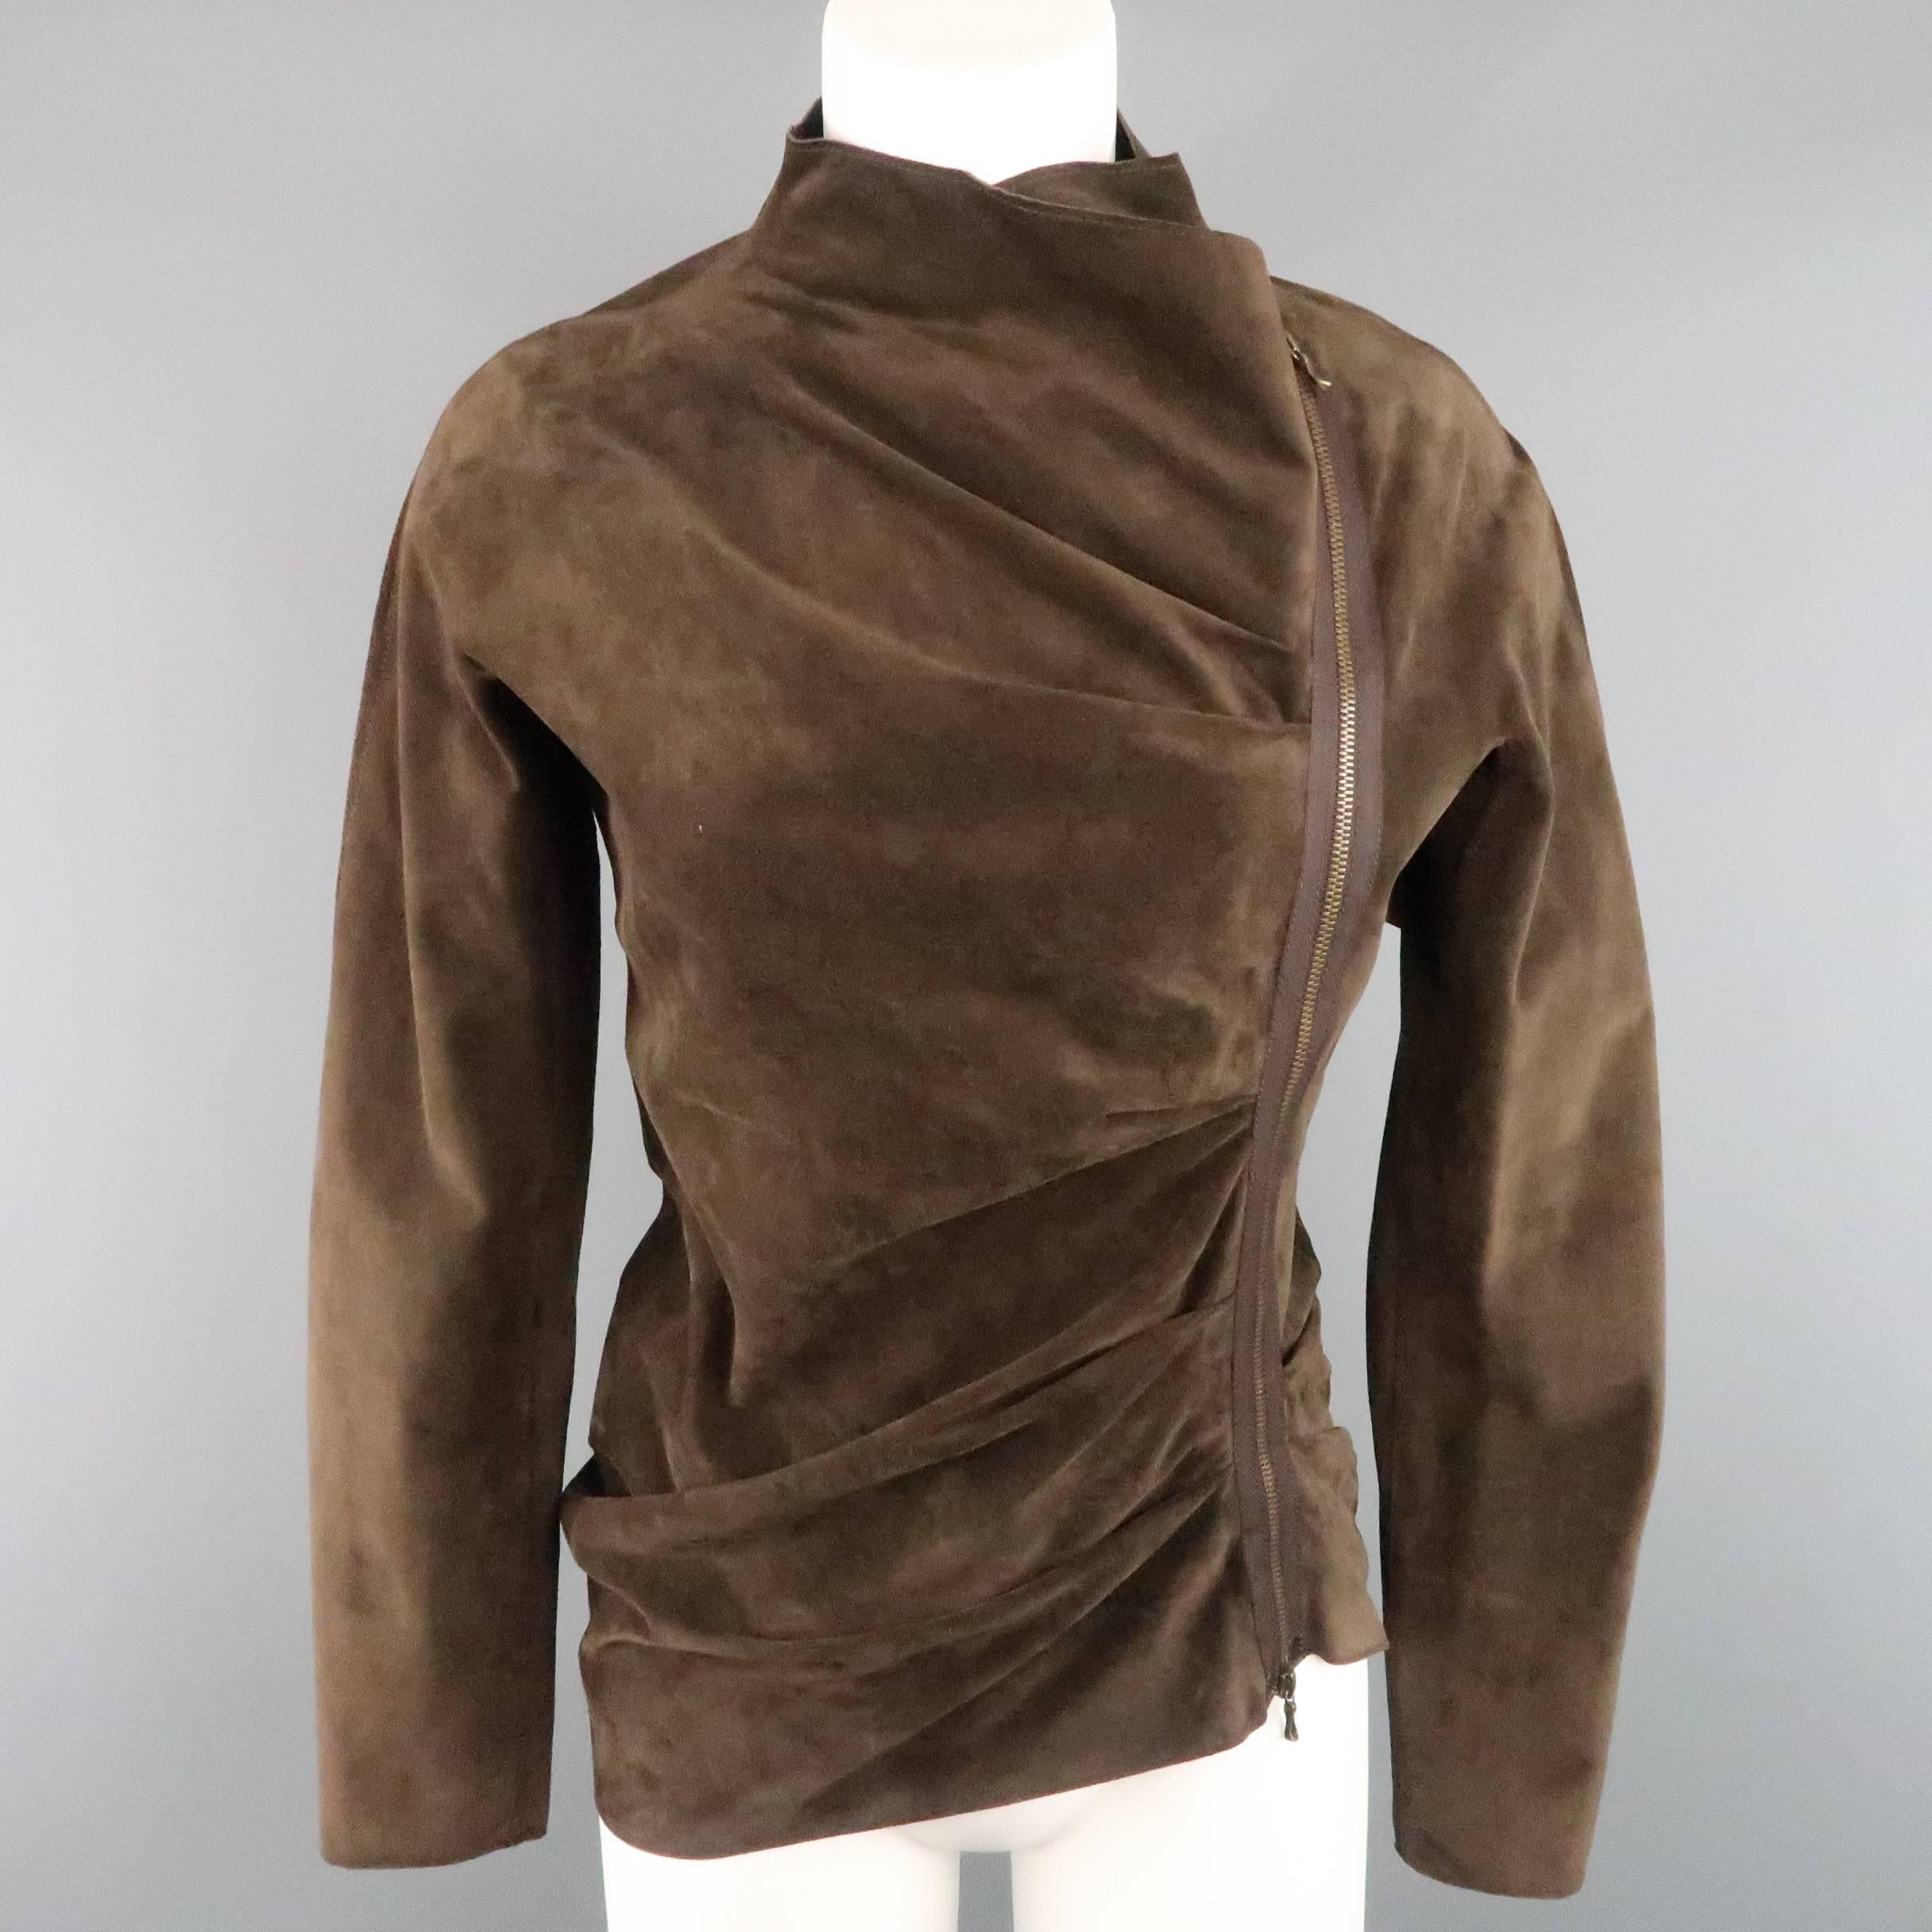 LANVIN jacket comes in brown suede and features an asymmetrical, double zip closure with ruched draping and high collar. Fall/Winter 2009 collection. Made in Italy.
 
Excellent Pre-Owned Condition.
Marked: IT 36
 
Measurements:
 
Shoulder: 16